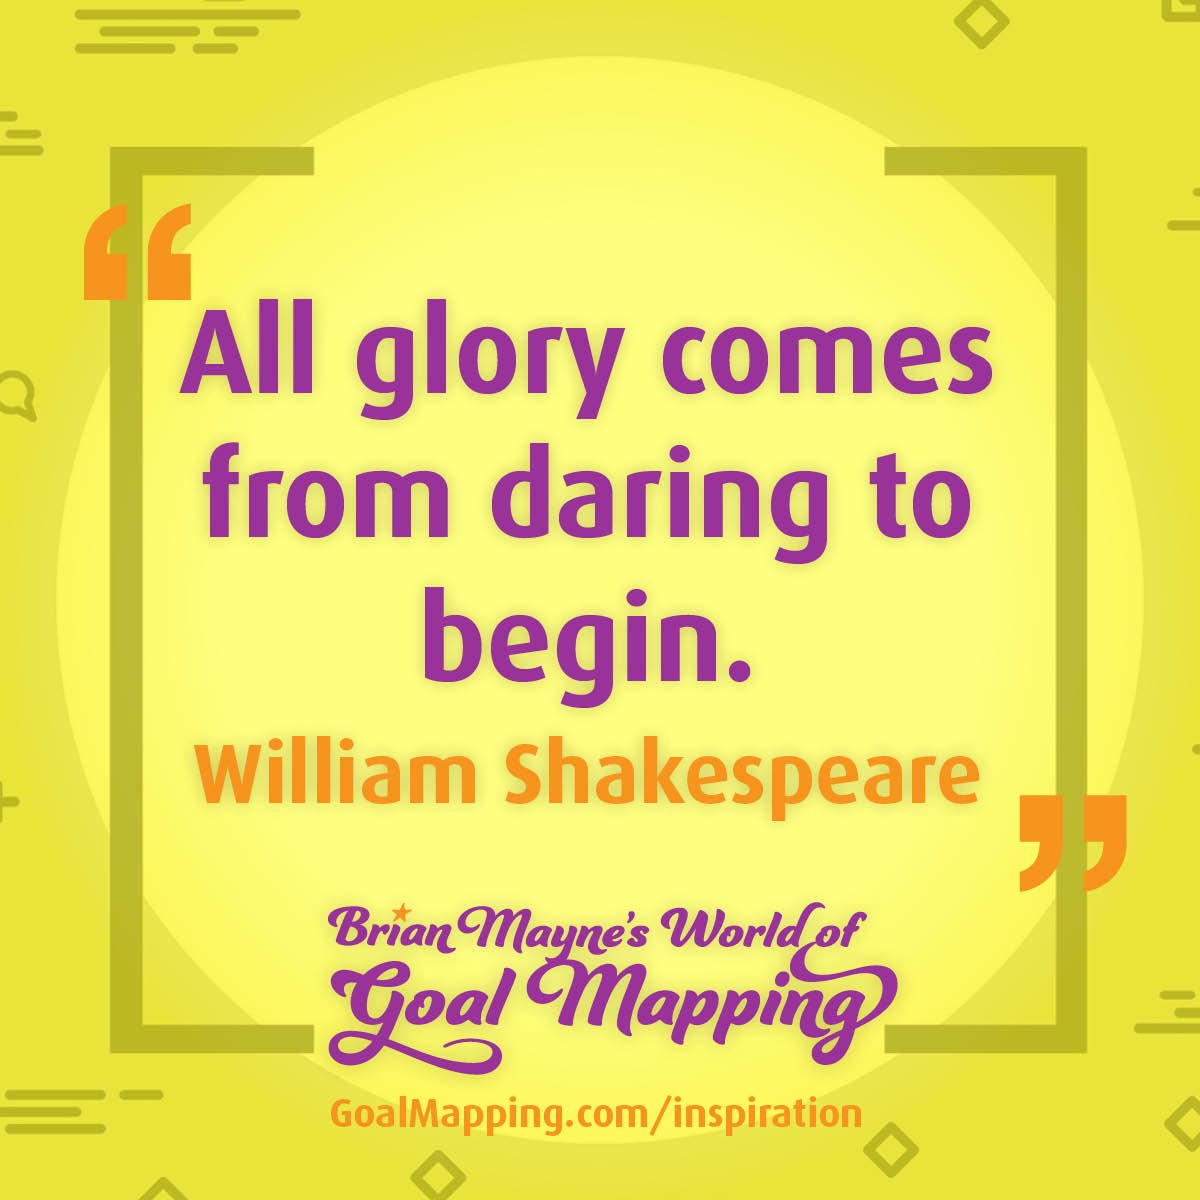 "All glory comes from daring to begin." William Shakespeare